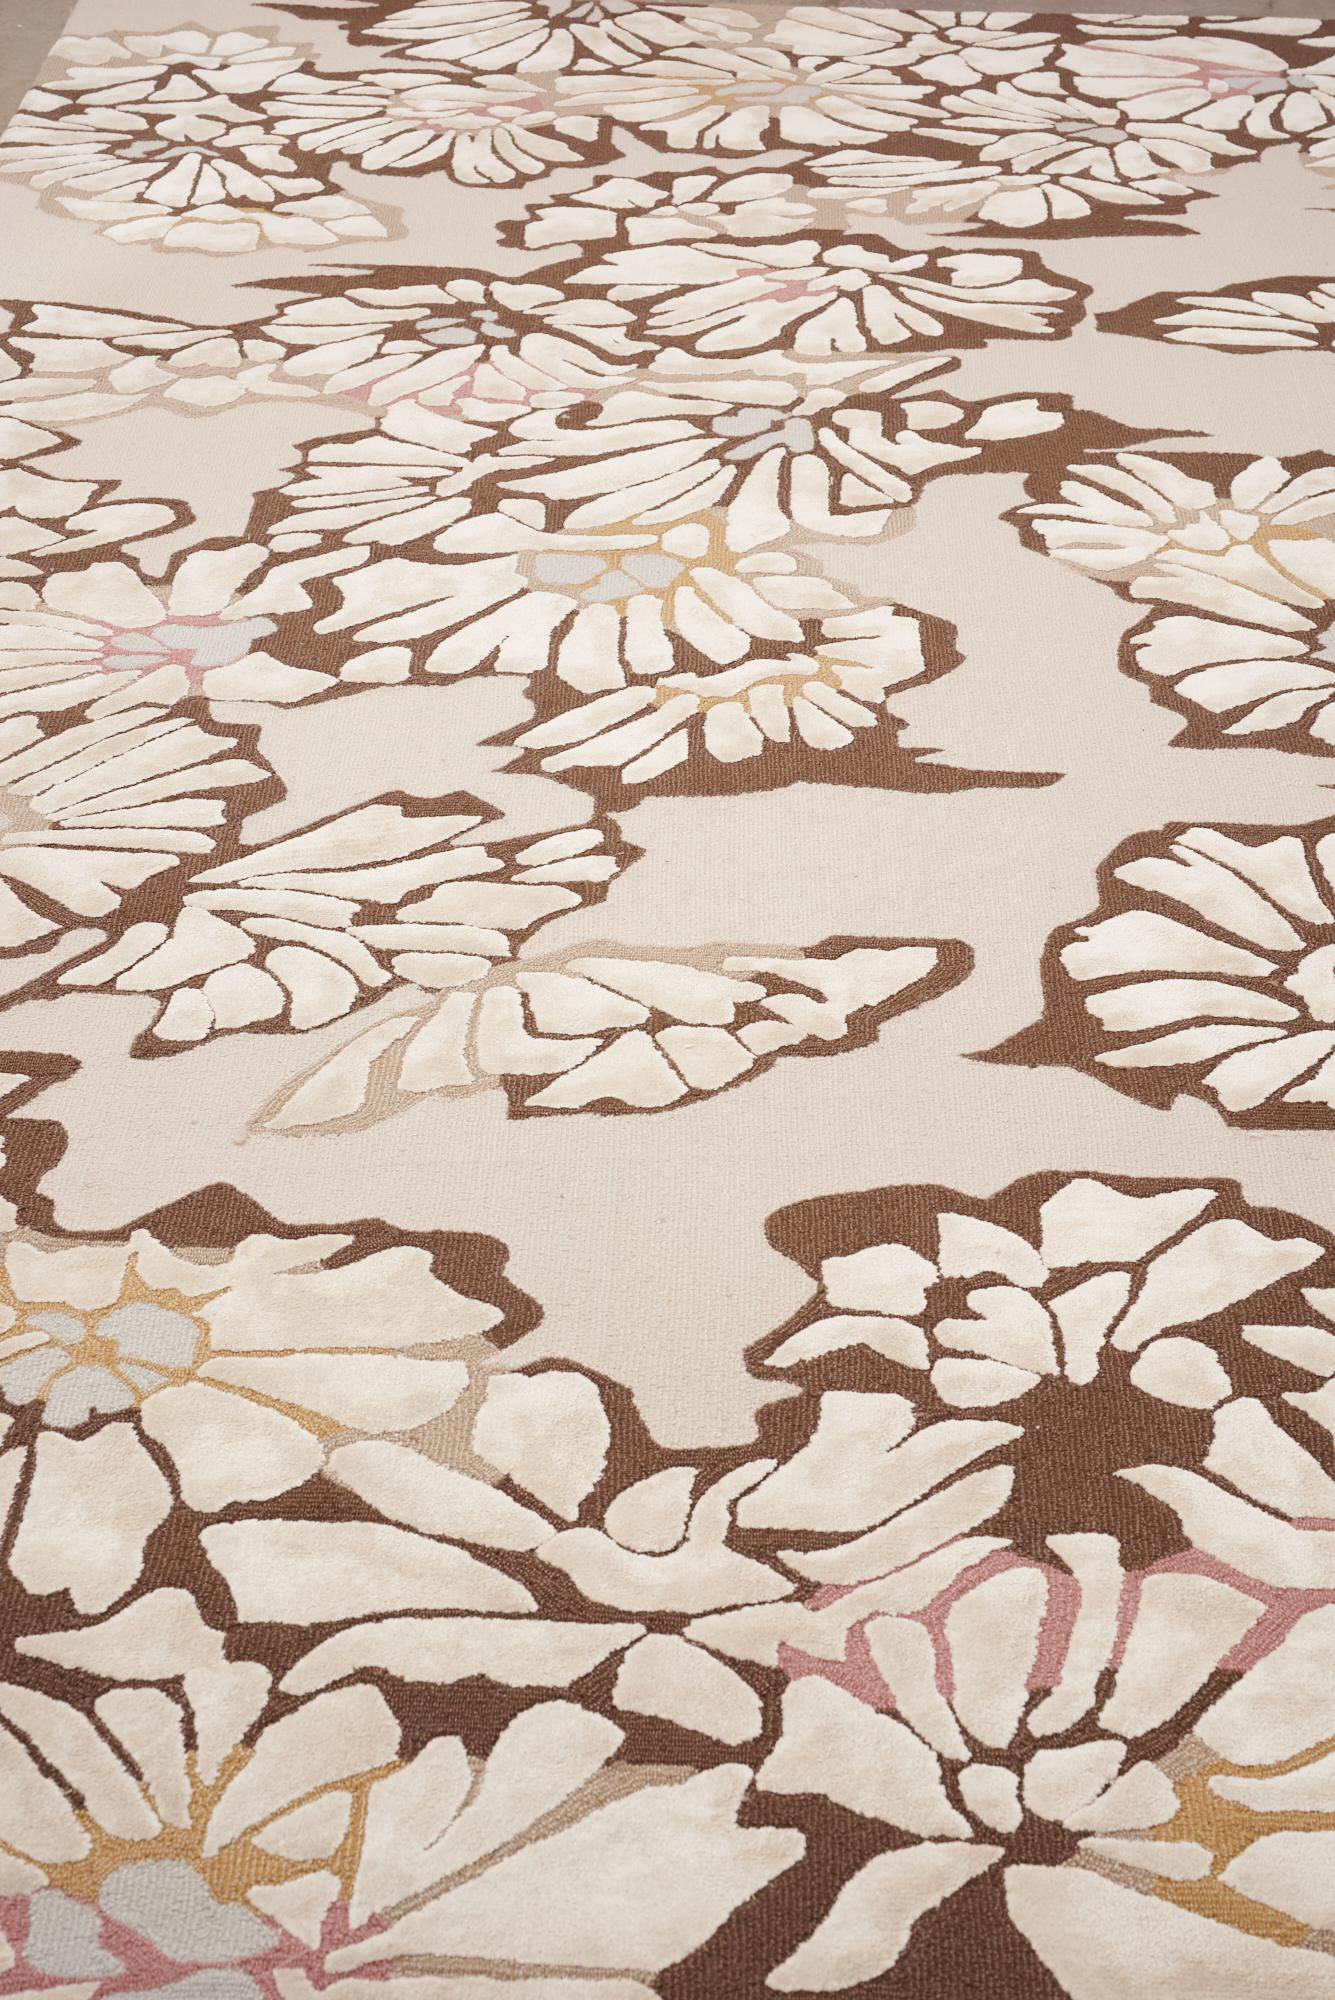 The Retro collection’s atomic-era charm makes for an elegant yet amusing collection of Fine rugs. Hand tufted and made of wool, silk, and viscose, the Retro collection will give you feelings of rose-tinted nostalgia and have you wishing for simpler